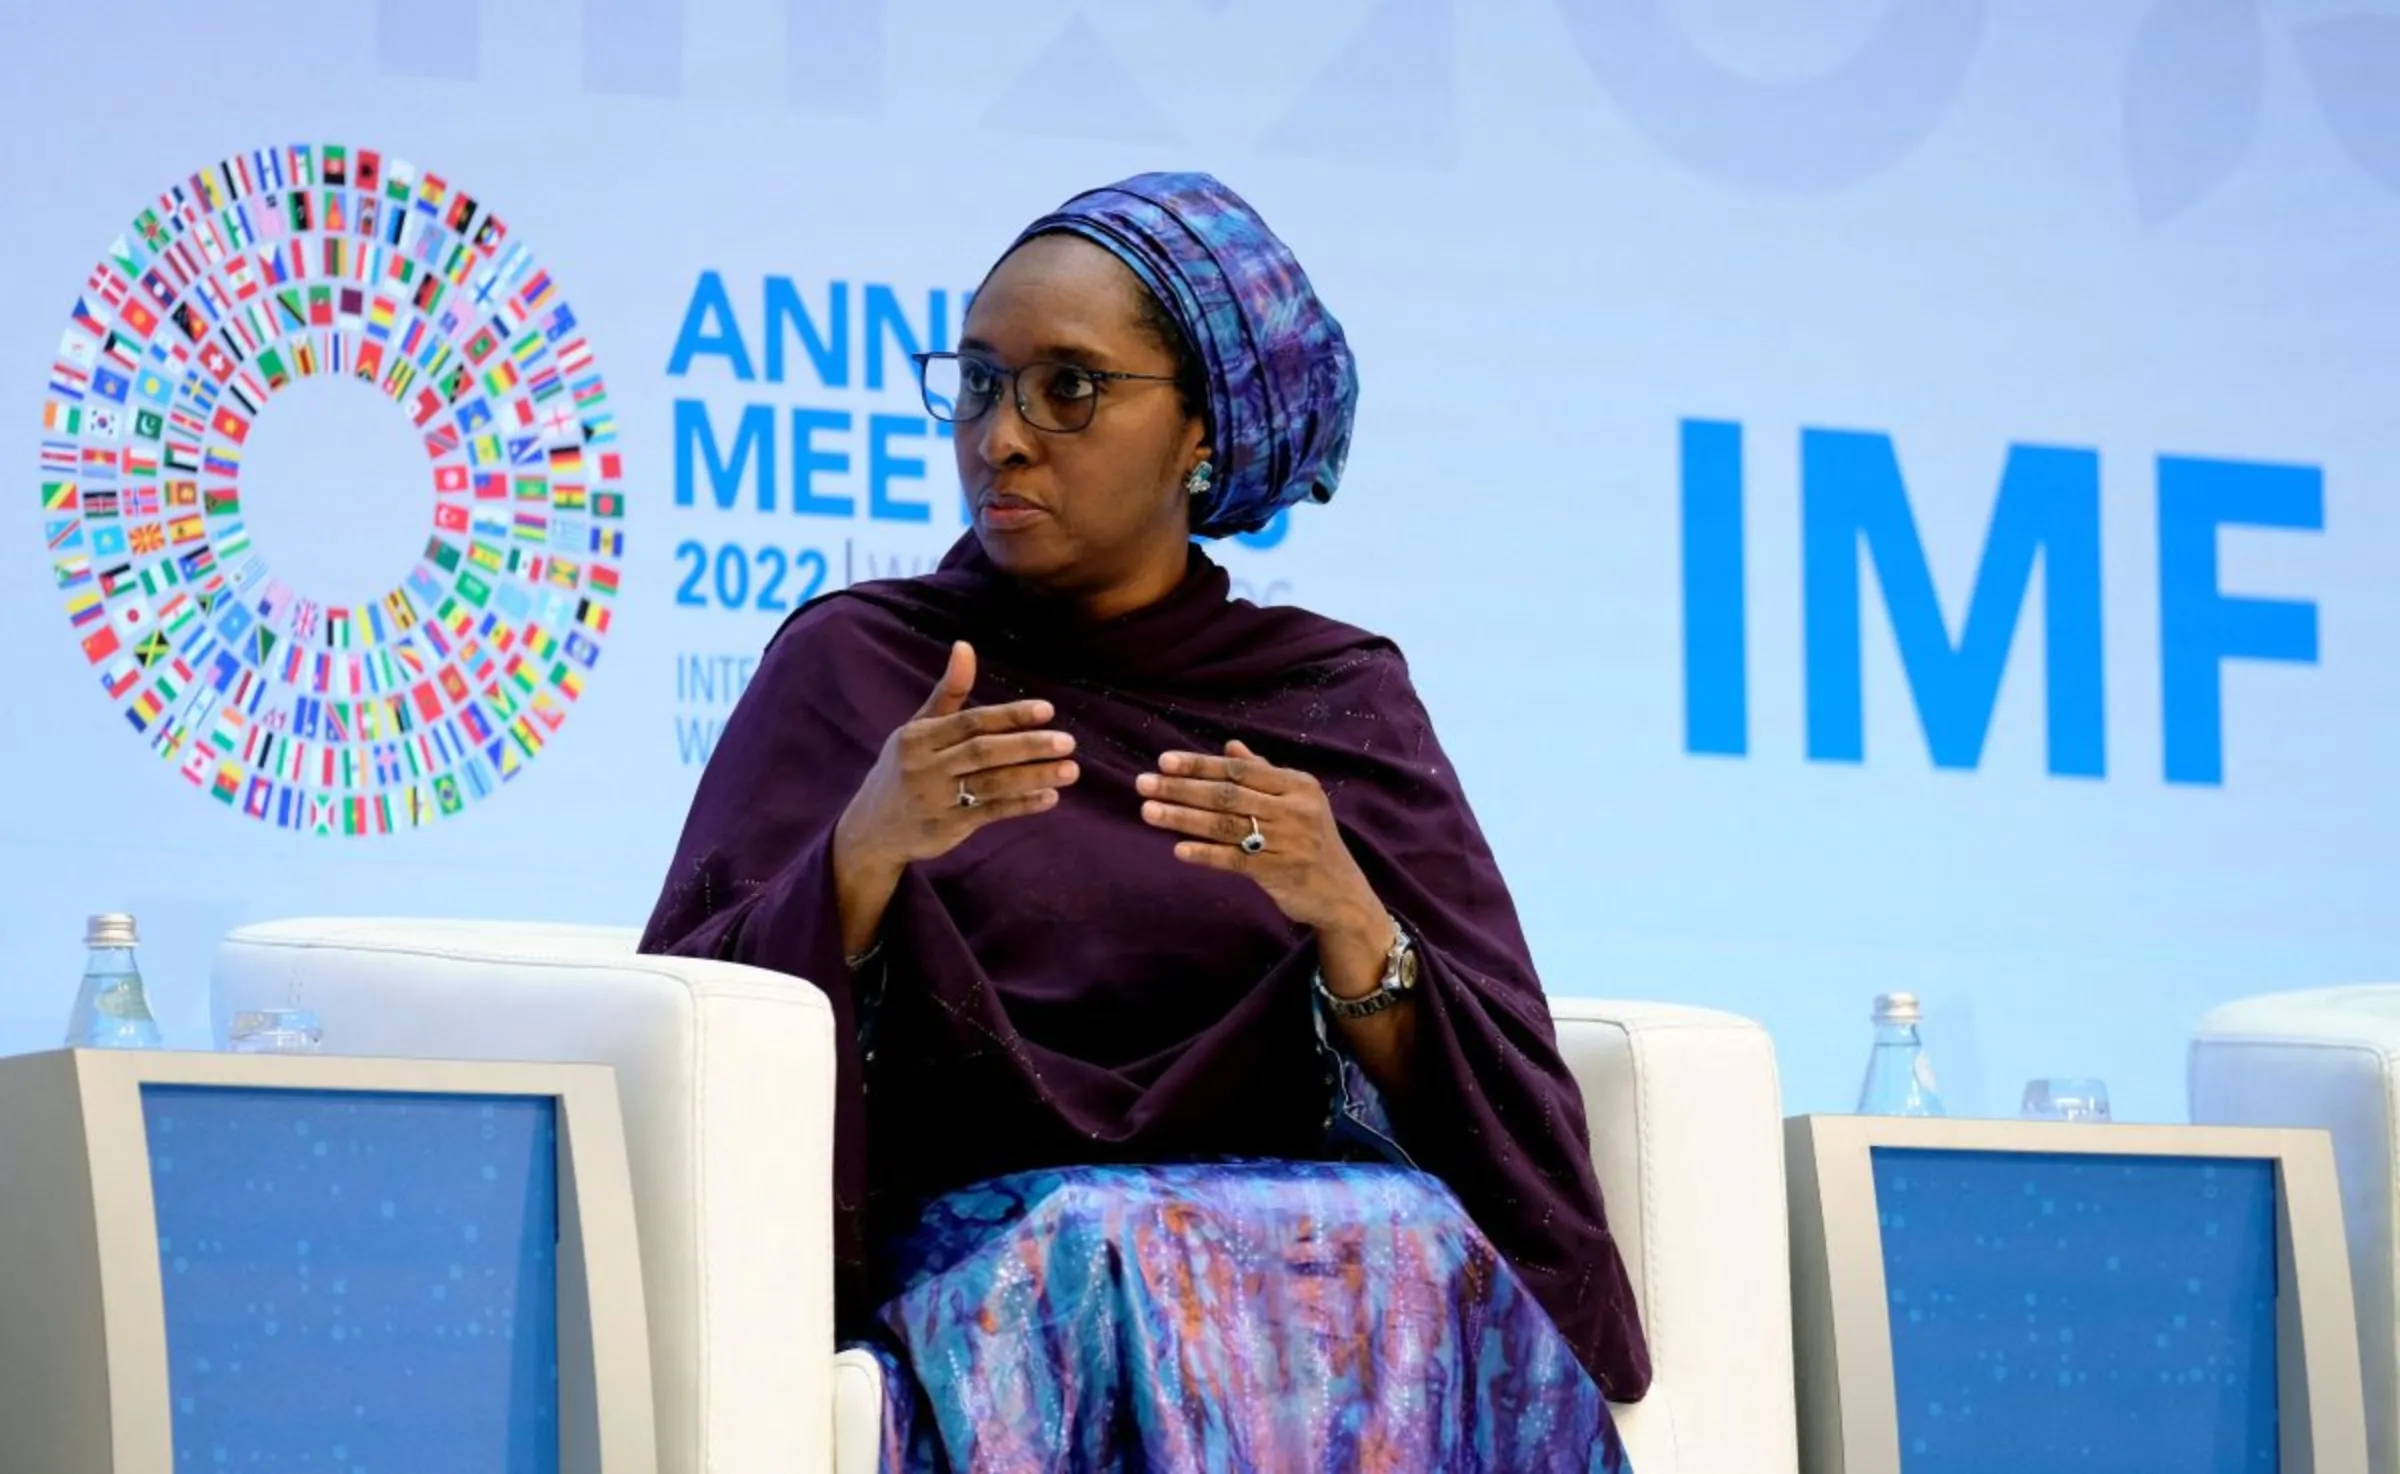 Nigeria's Minister of Finance Zainab Ahmed speaks at the headquarters of the International Monetary Fund during the Annual Meetings of the IMF and World Bank in Washington, U.S., October 13, 2022. REUTERS/James Lawler Duggan